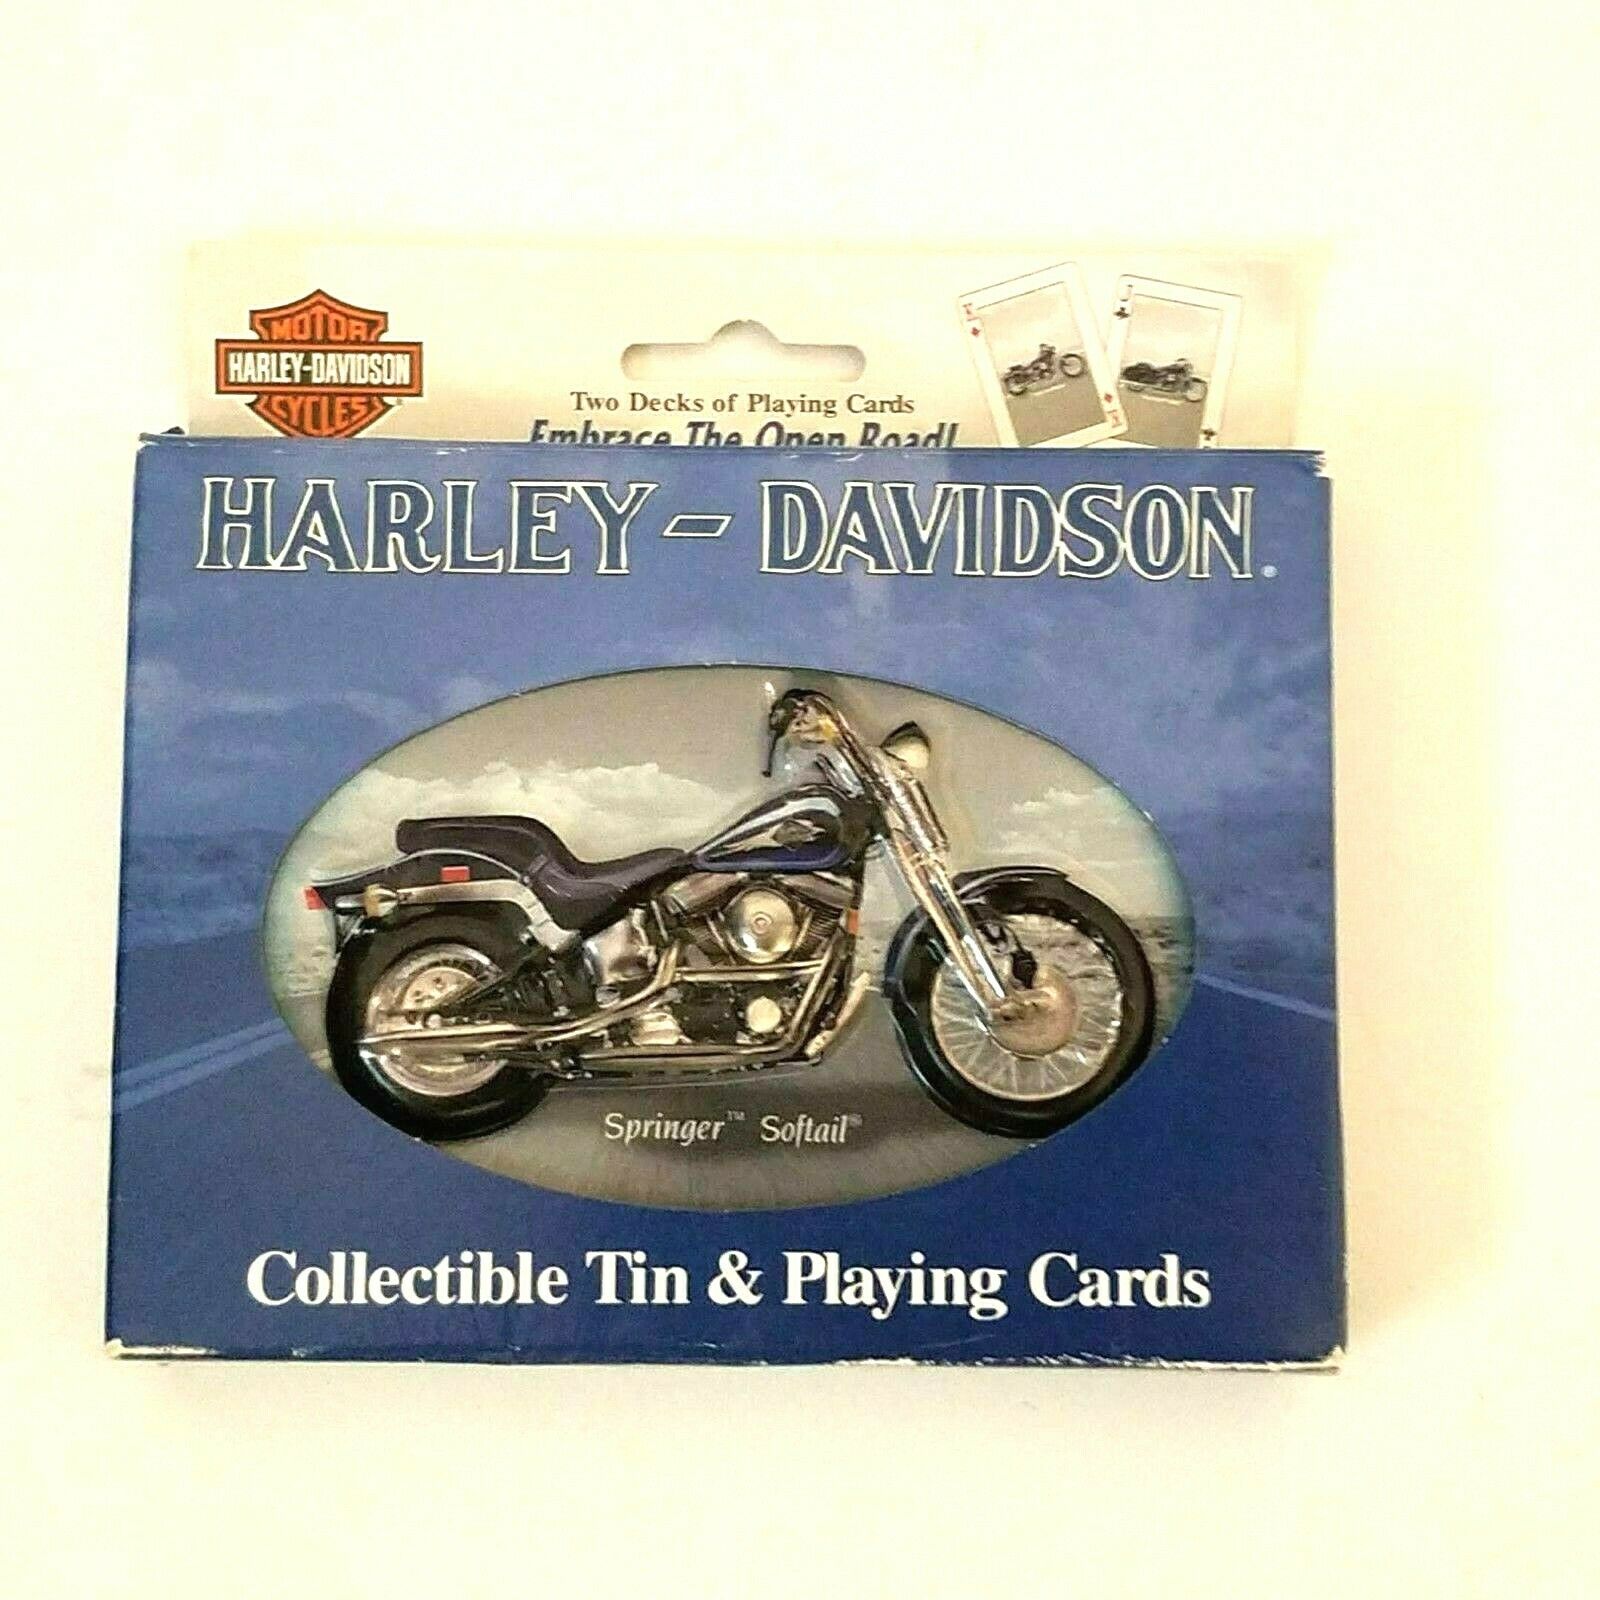 Harley Davidson Springer Softail Collectible Tin And 2 Decks Playing Cards 2001